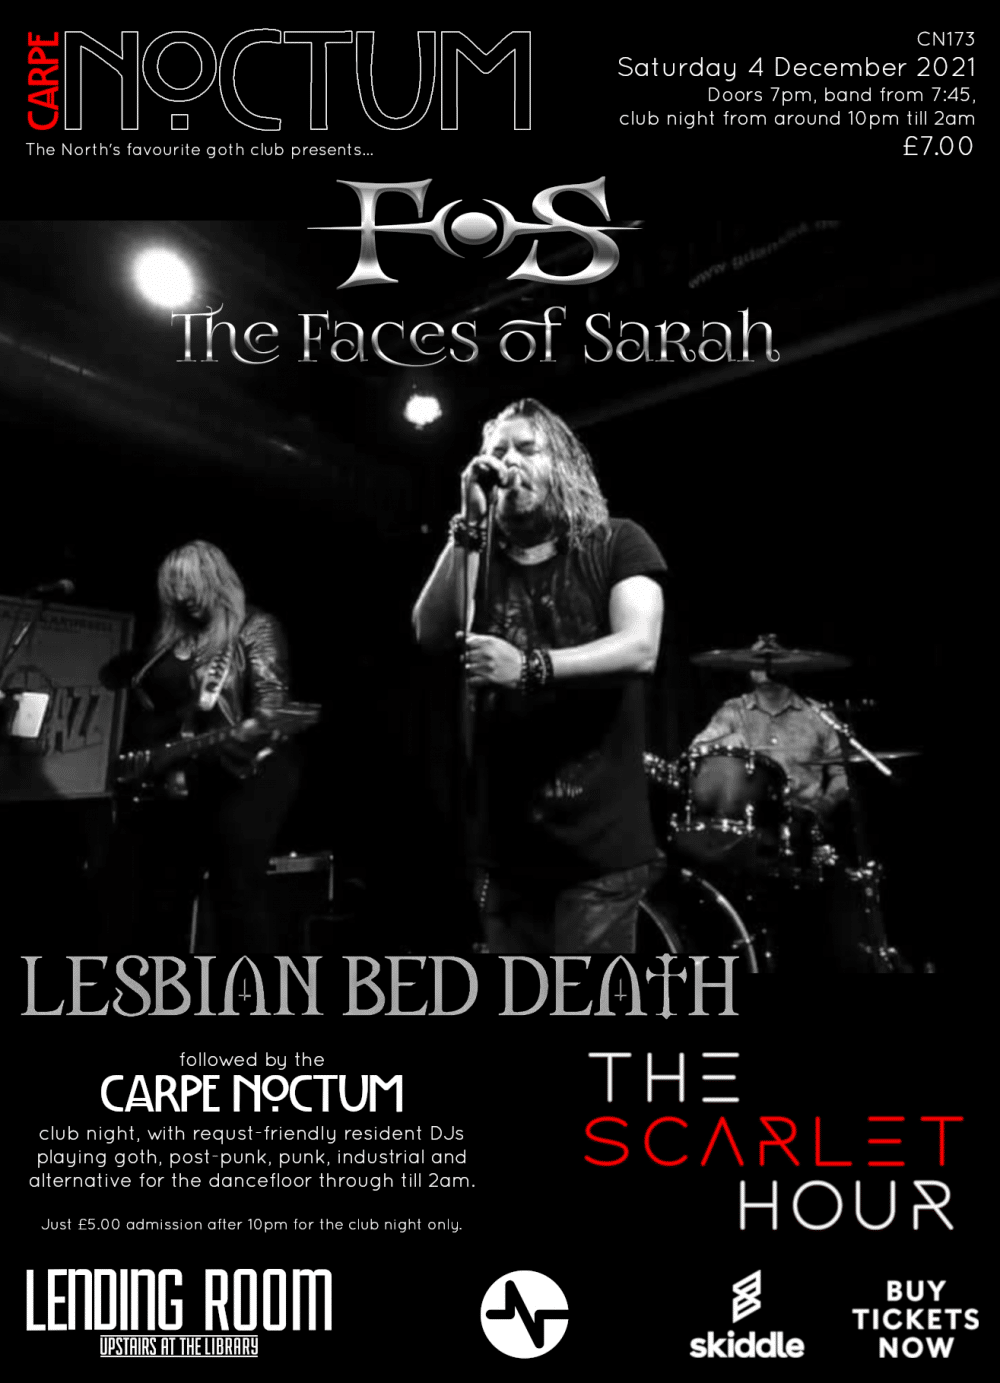 Carpe Noctum: Faces of Sarah, Lesbian Bed Death, and The Scarlet Hour